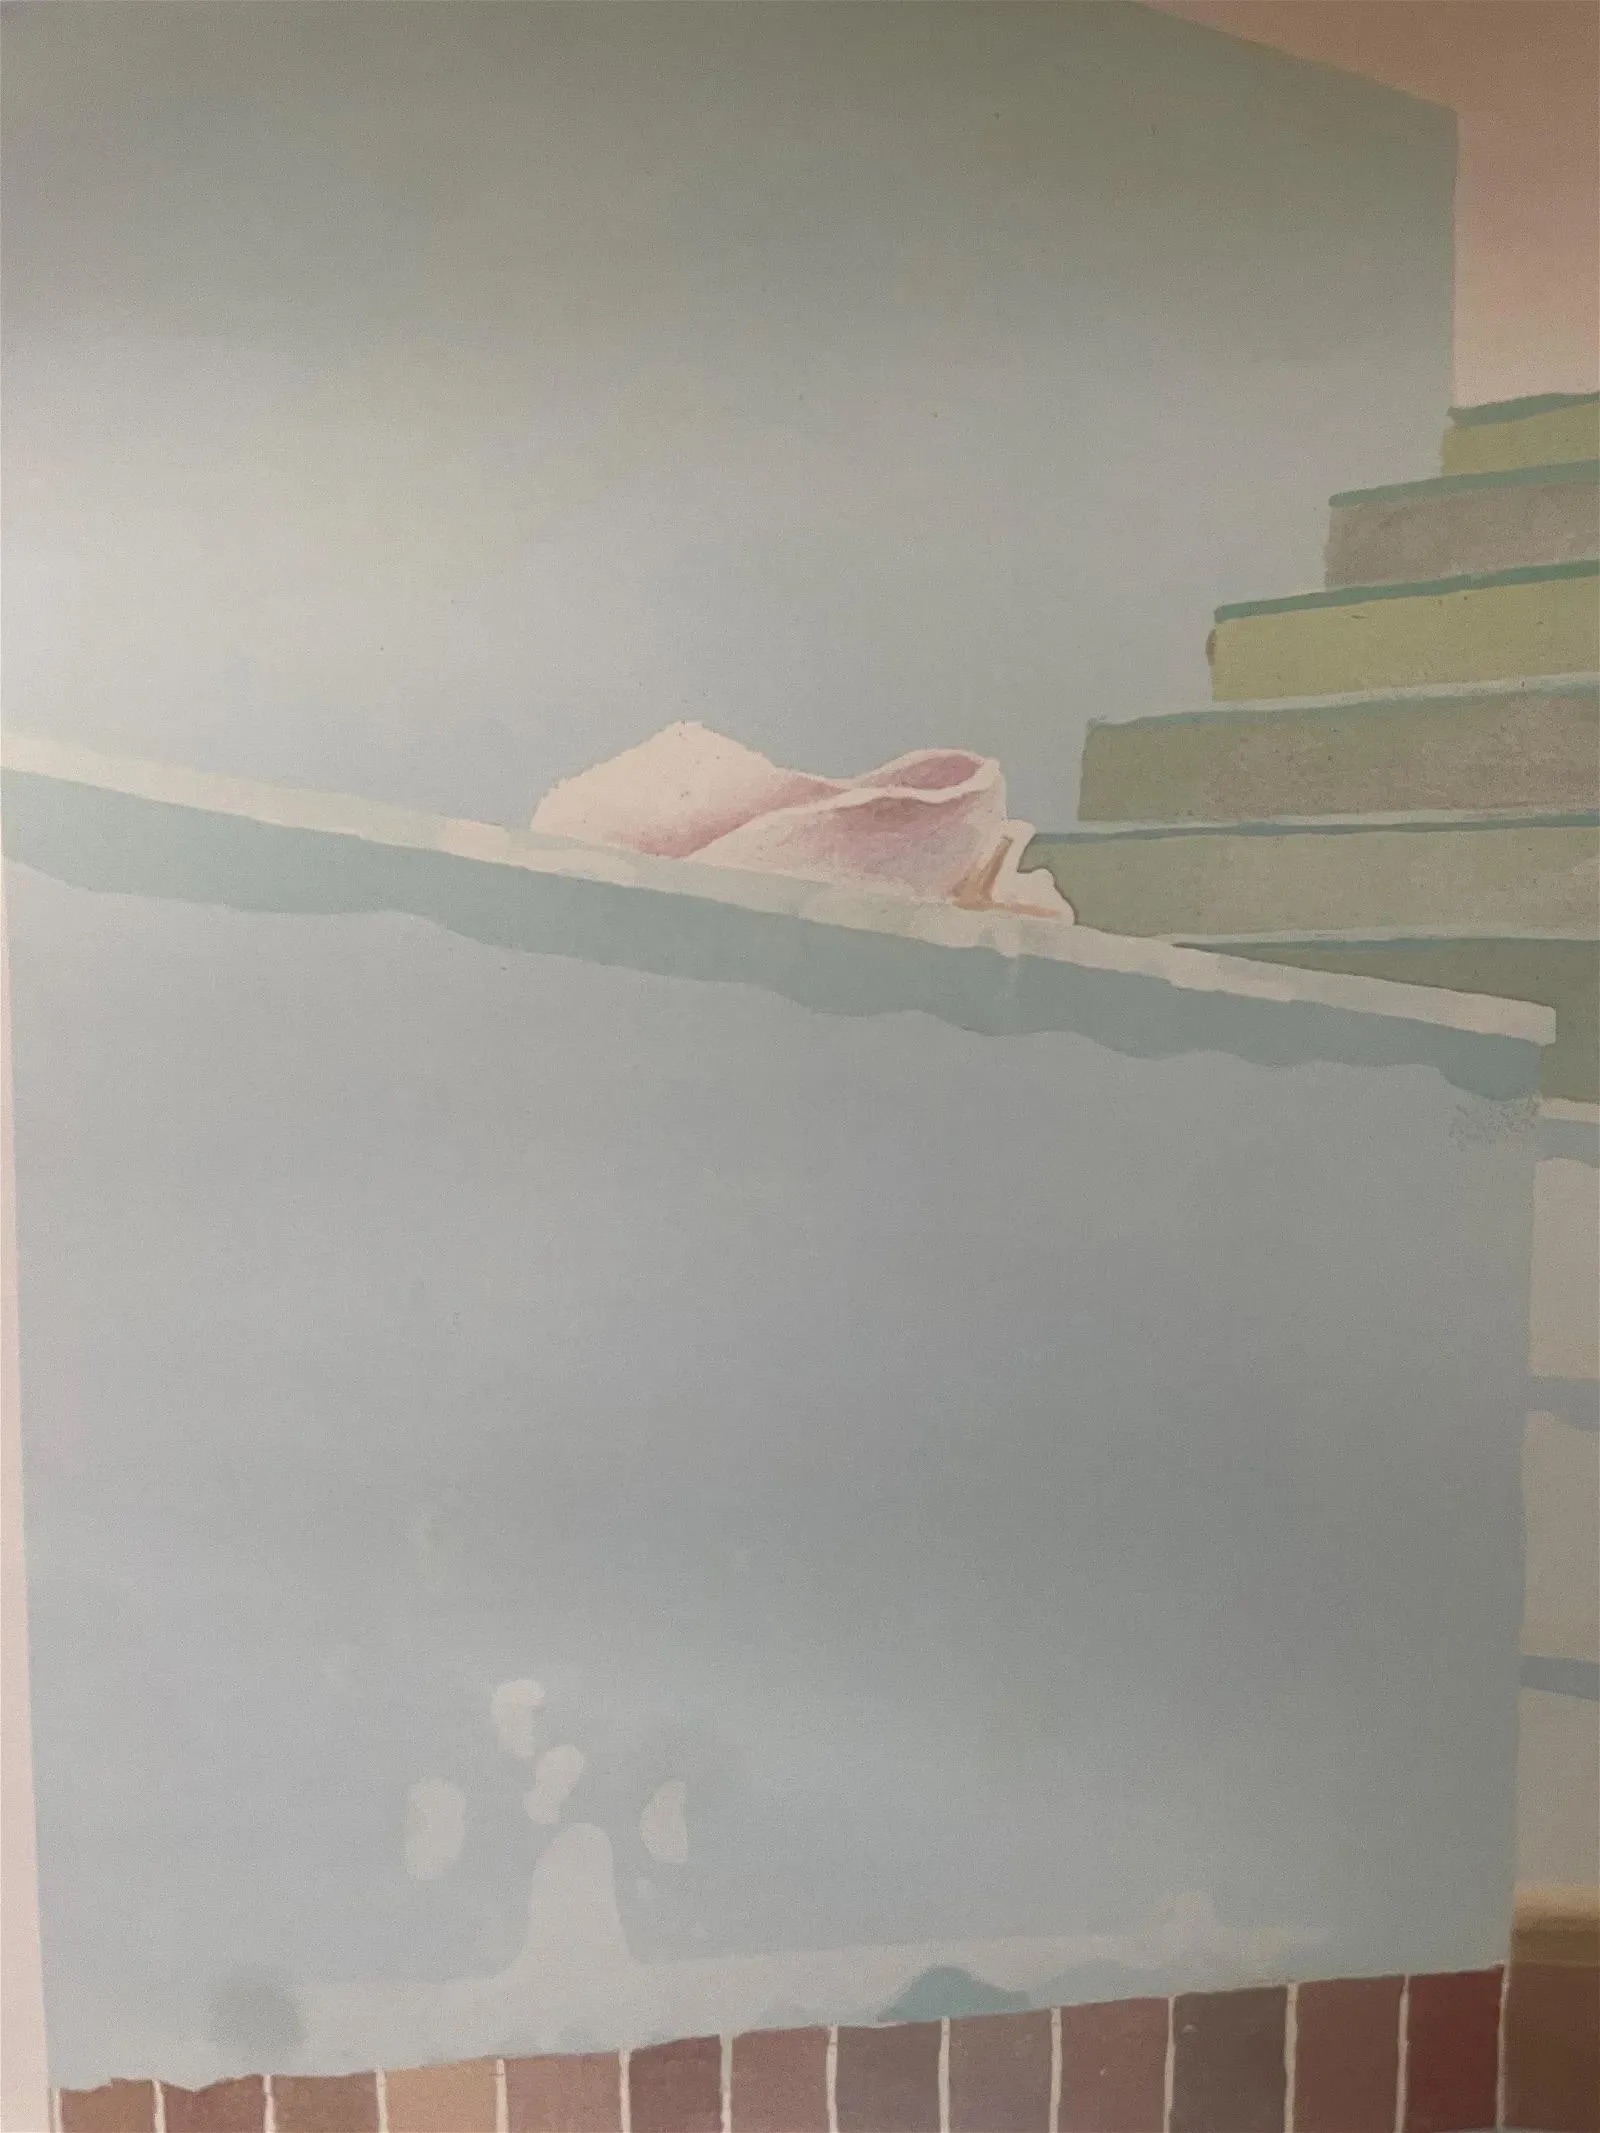 David Hockney "Pool and Steps, 1971" Offset Lithograph - Image 2 of 6